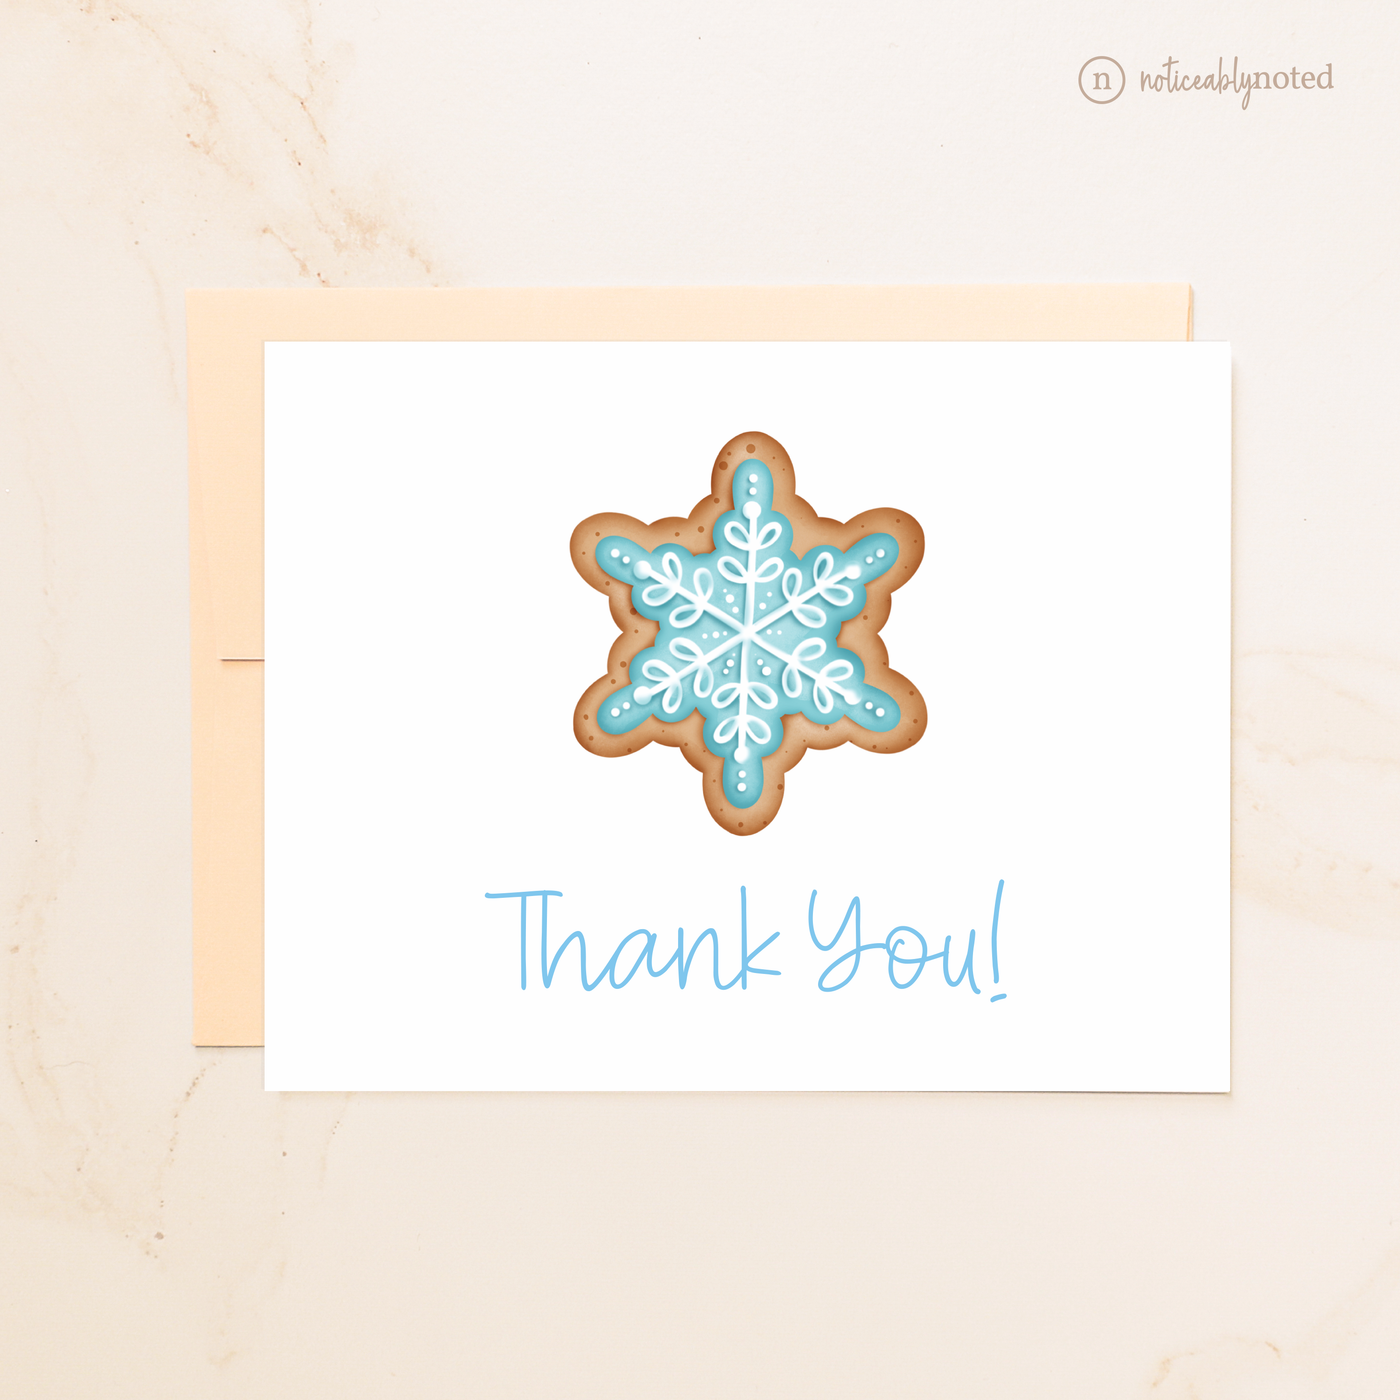 Snowflake Cookie Folded Thank You Cards | Noticeably Noted